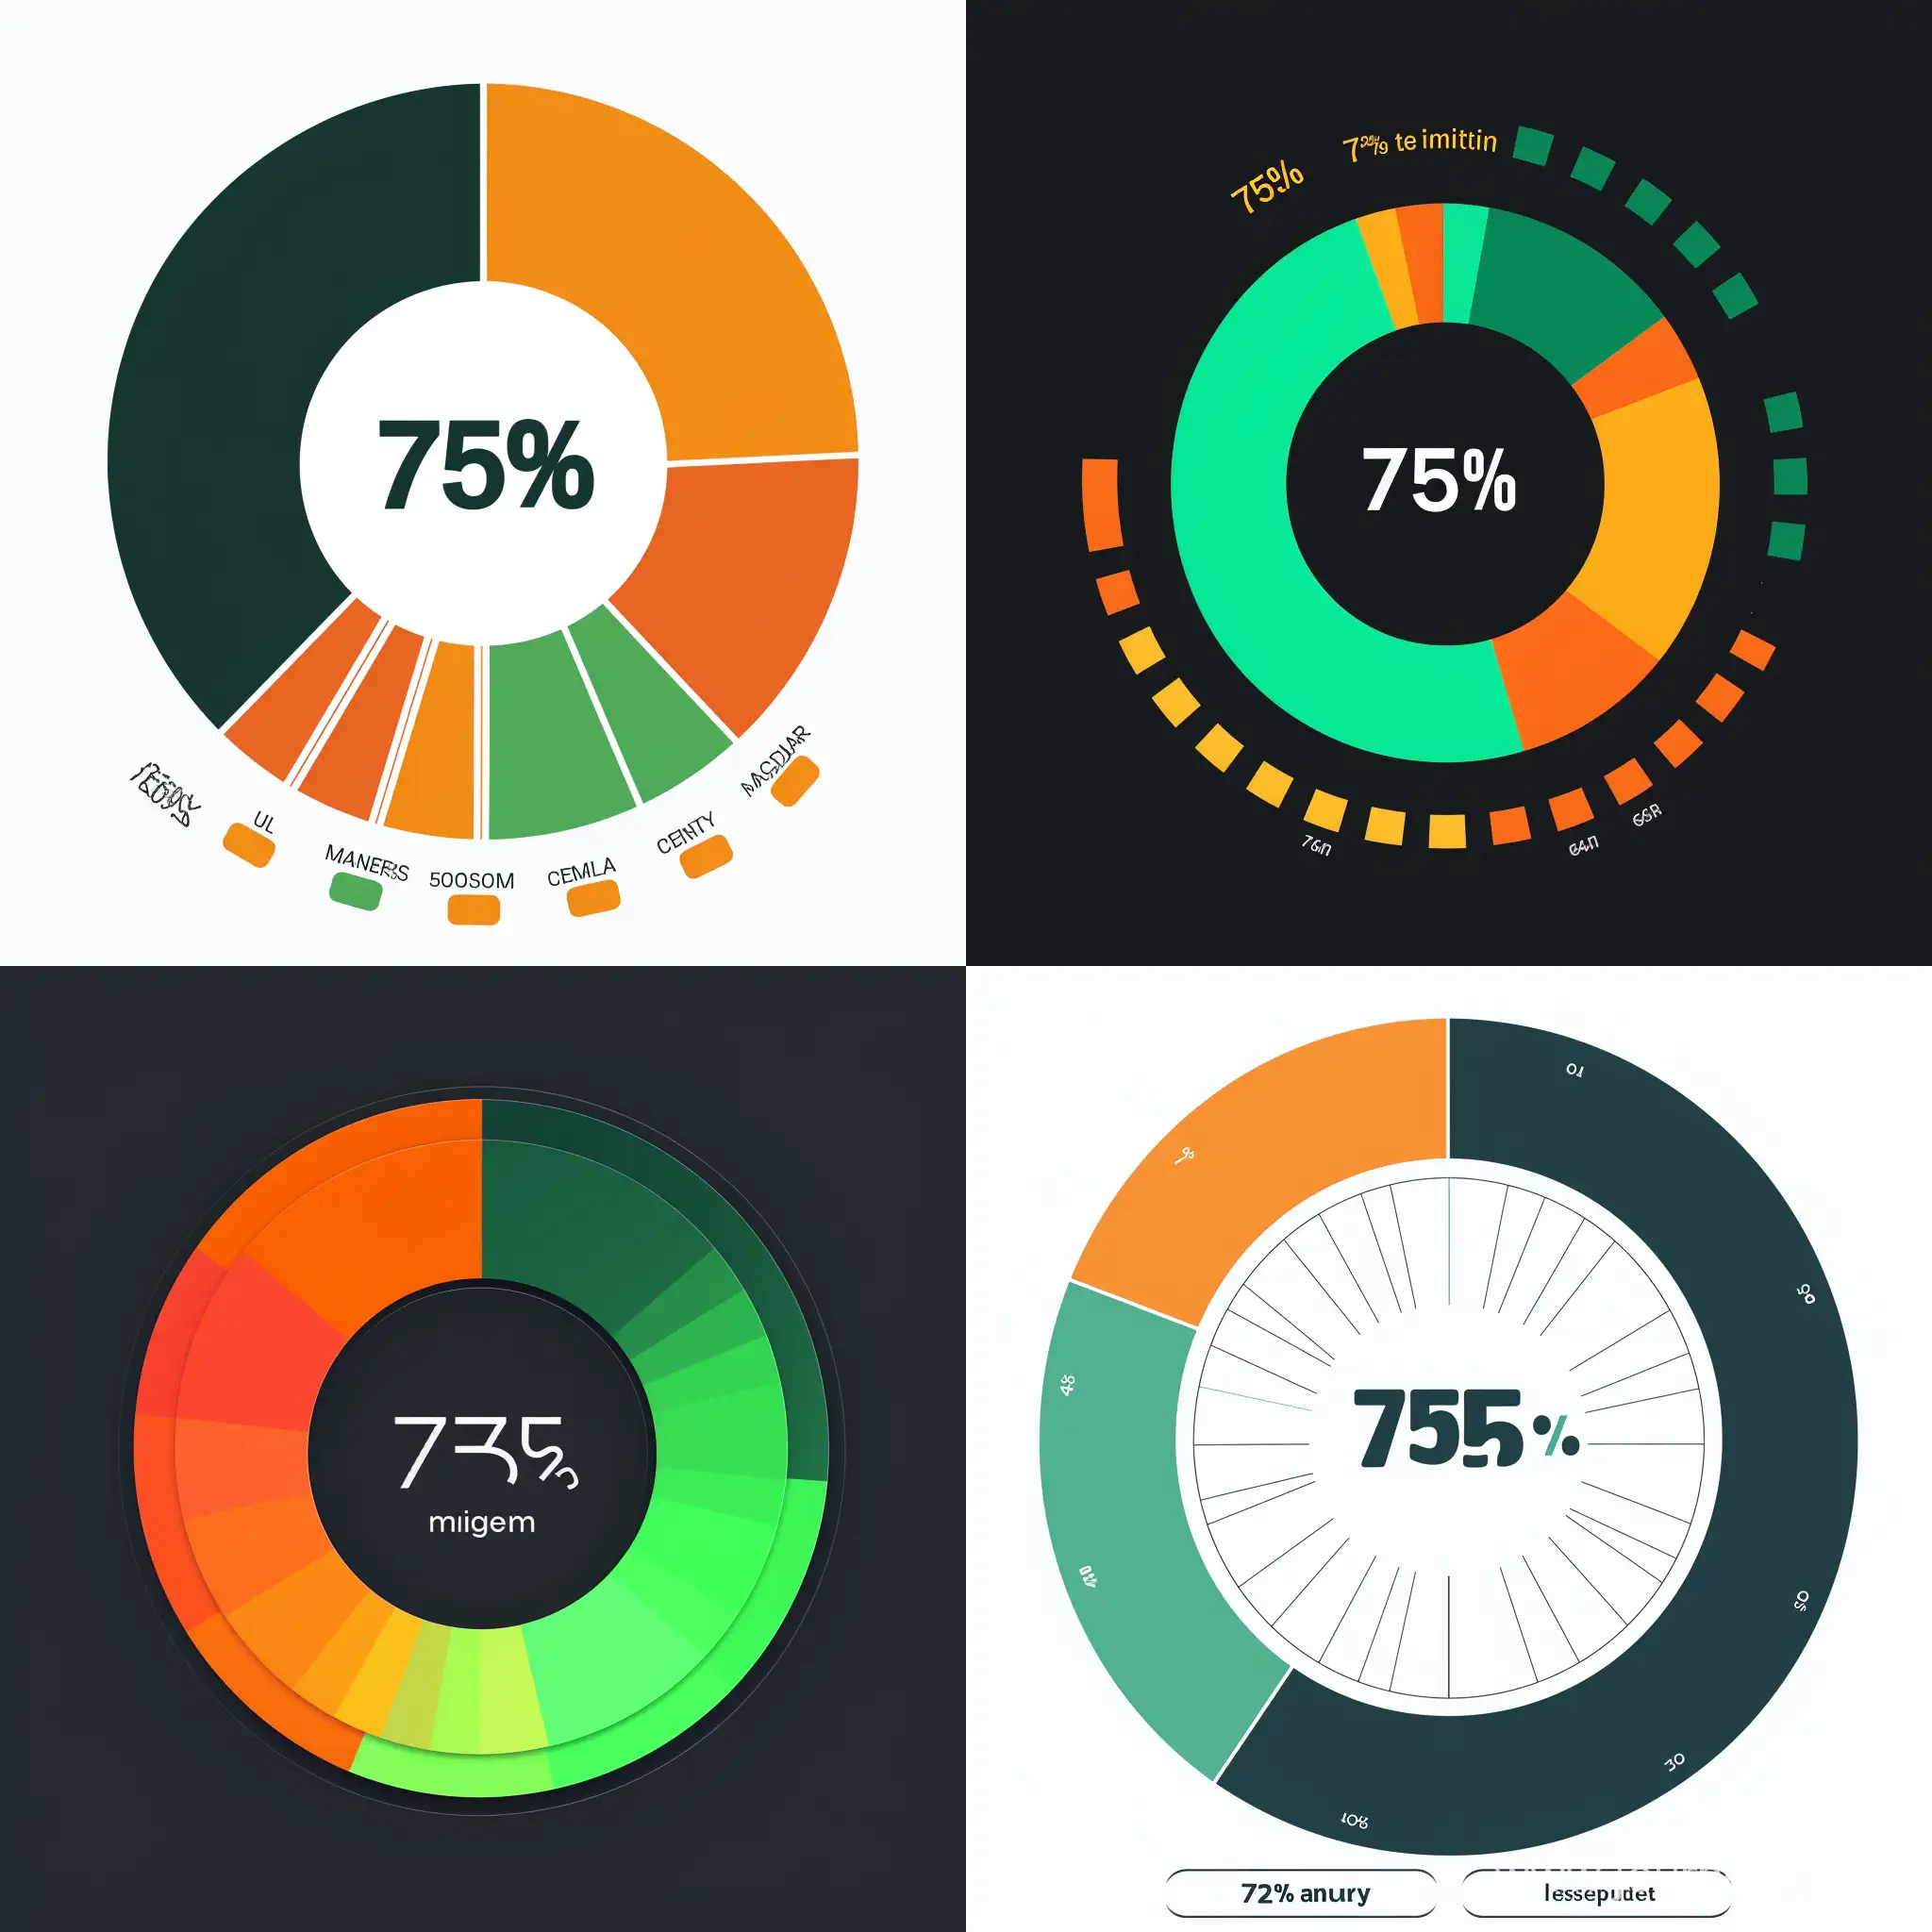 Darkthemed-Donut-Chart-Showing-75-Metric-with-Green-and-Orange-Sectors